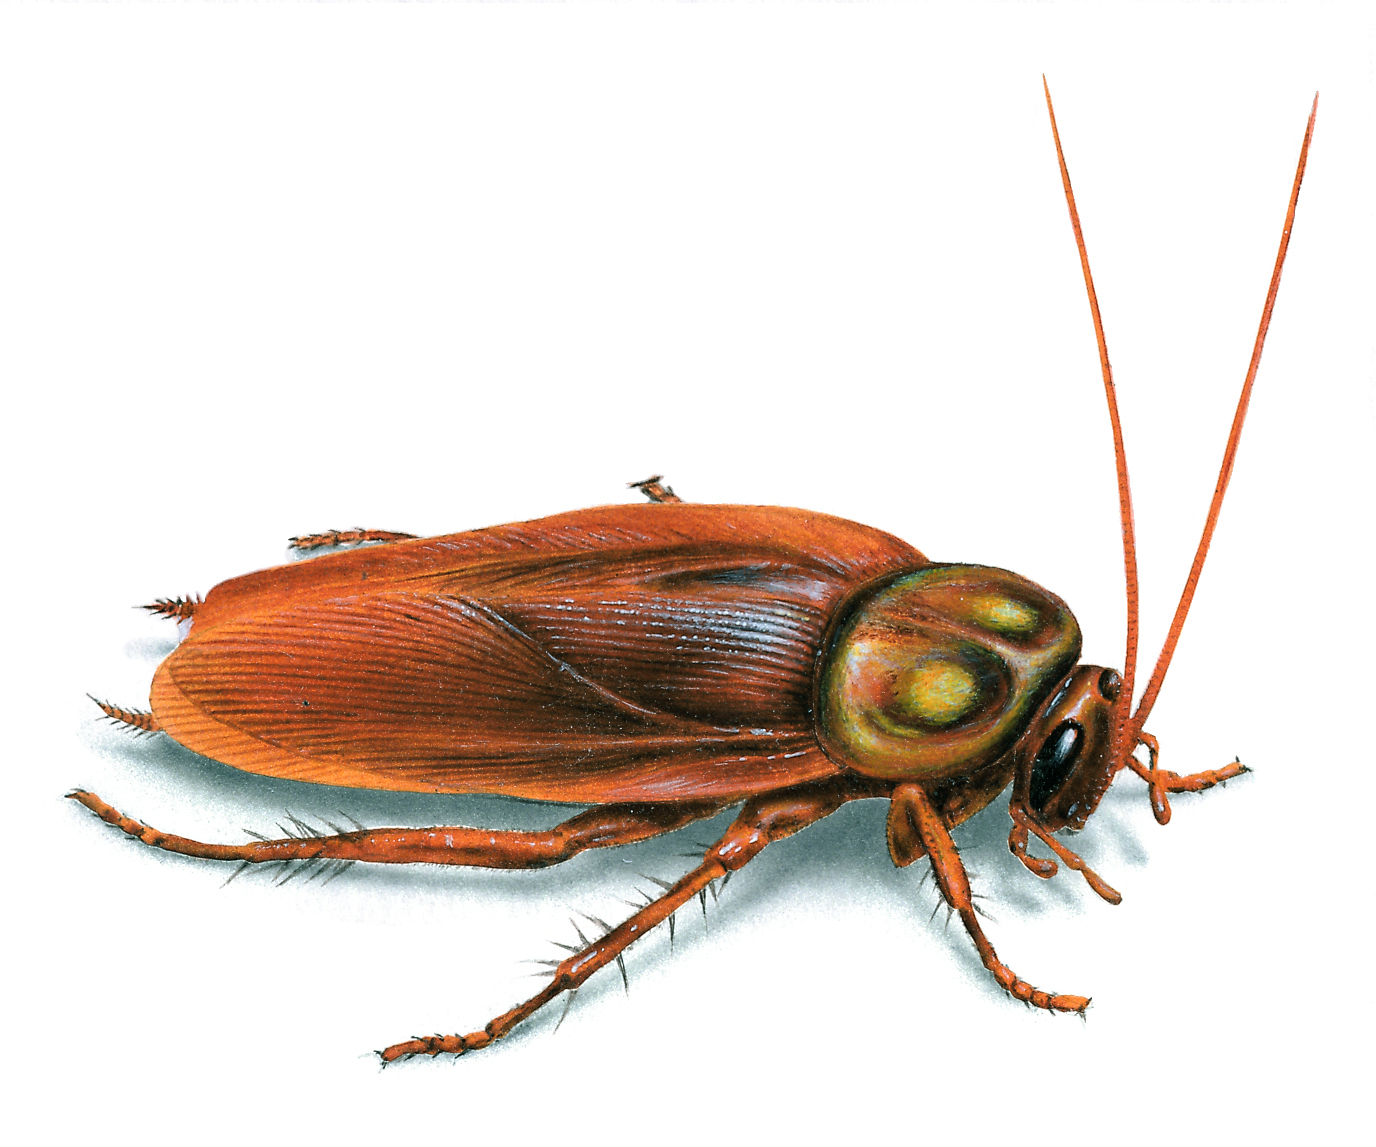 Pictures of Cockroaches, Images  Photos of a Cockroach